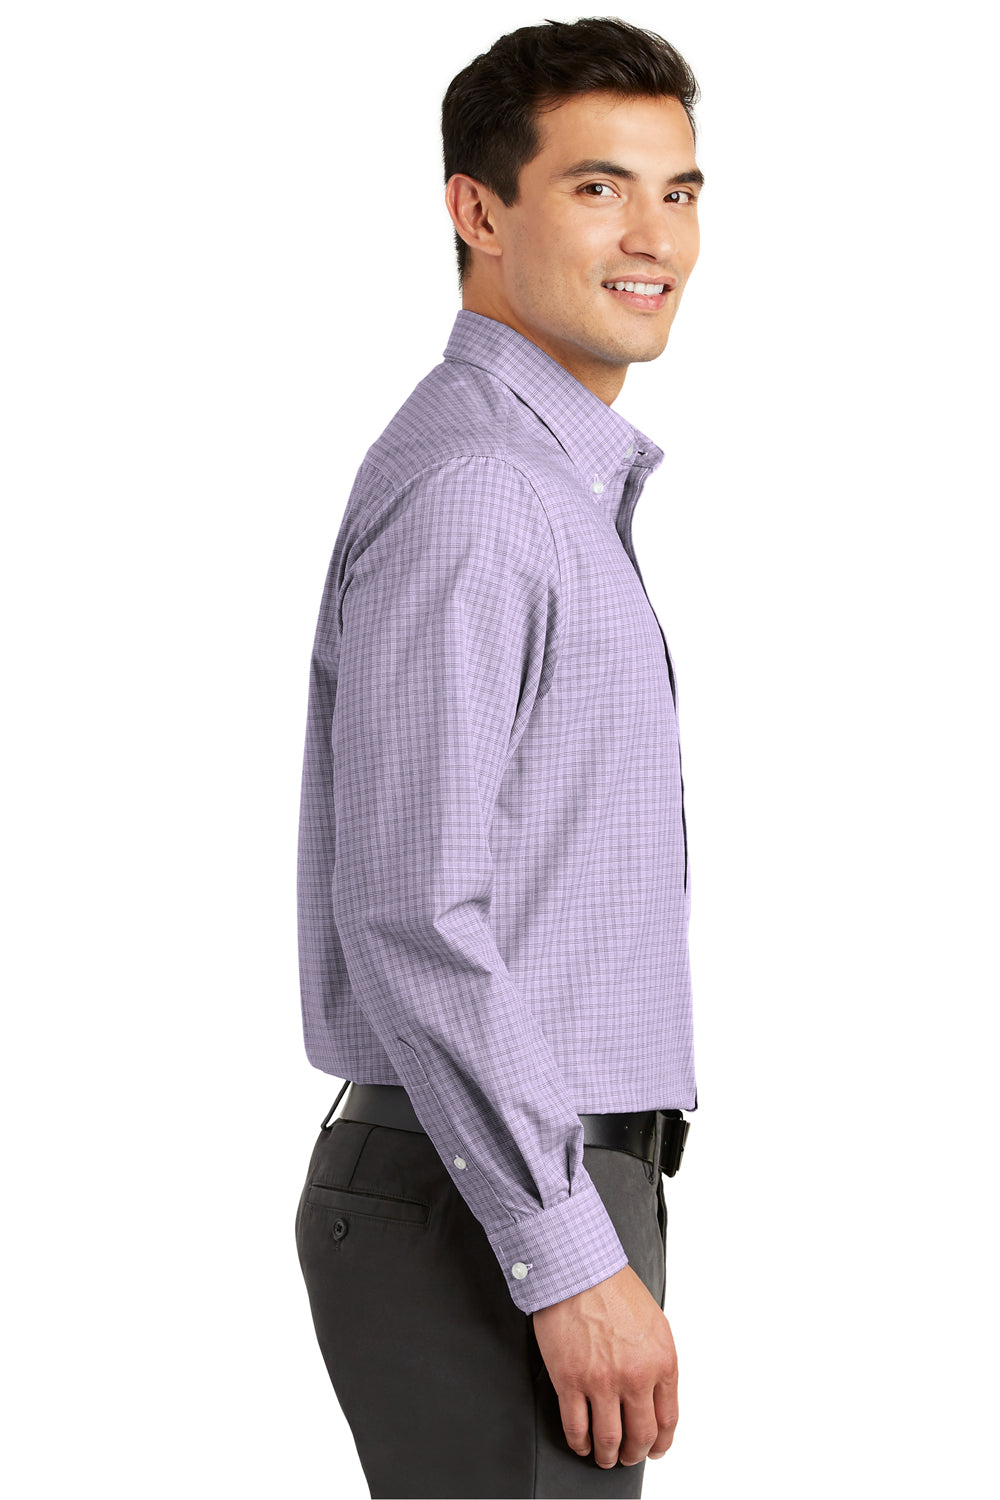 Port Authority S639 Mens Easy Care Wrinkle Resistant Long Sleeve Button Down Shirt w/ Pocket Purple Side